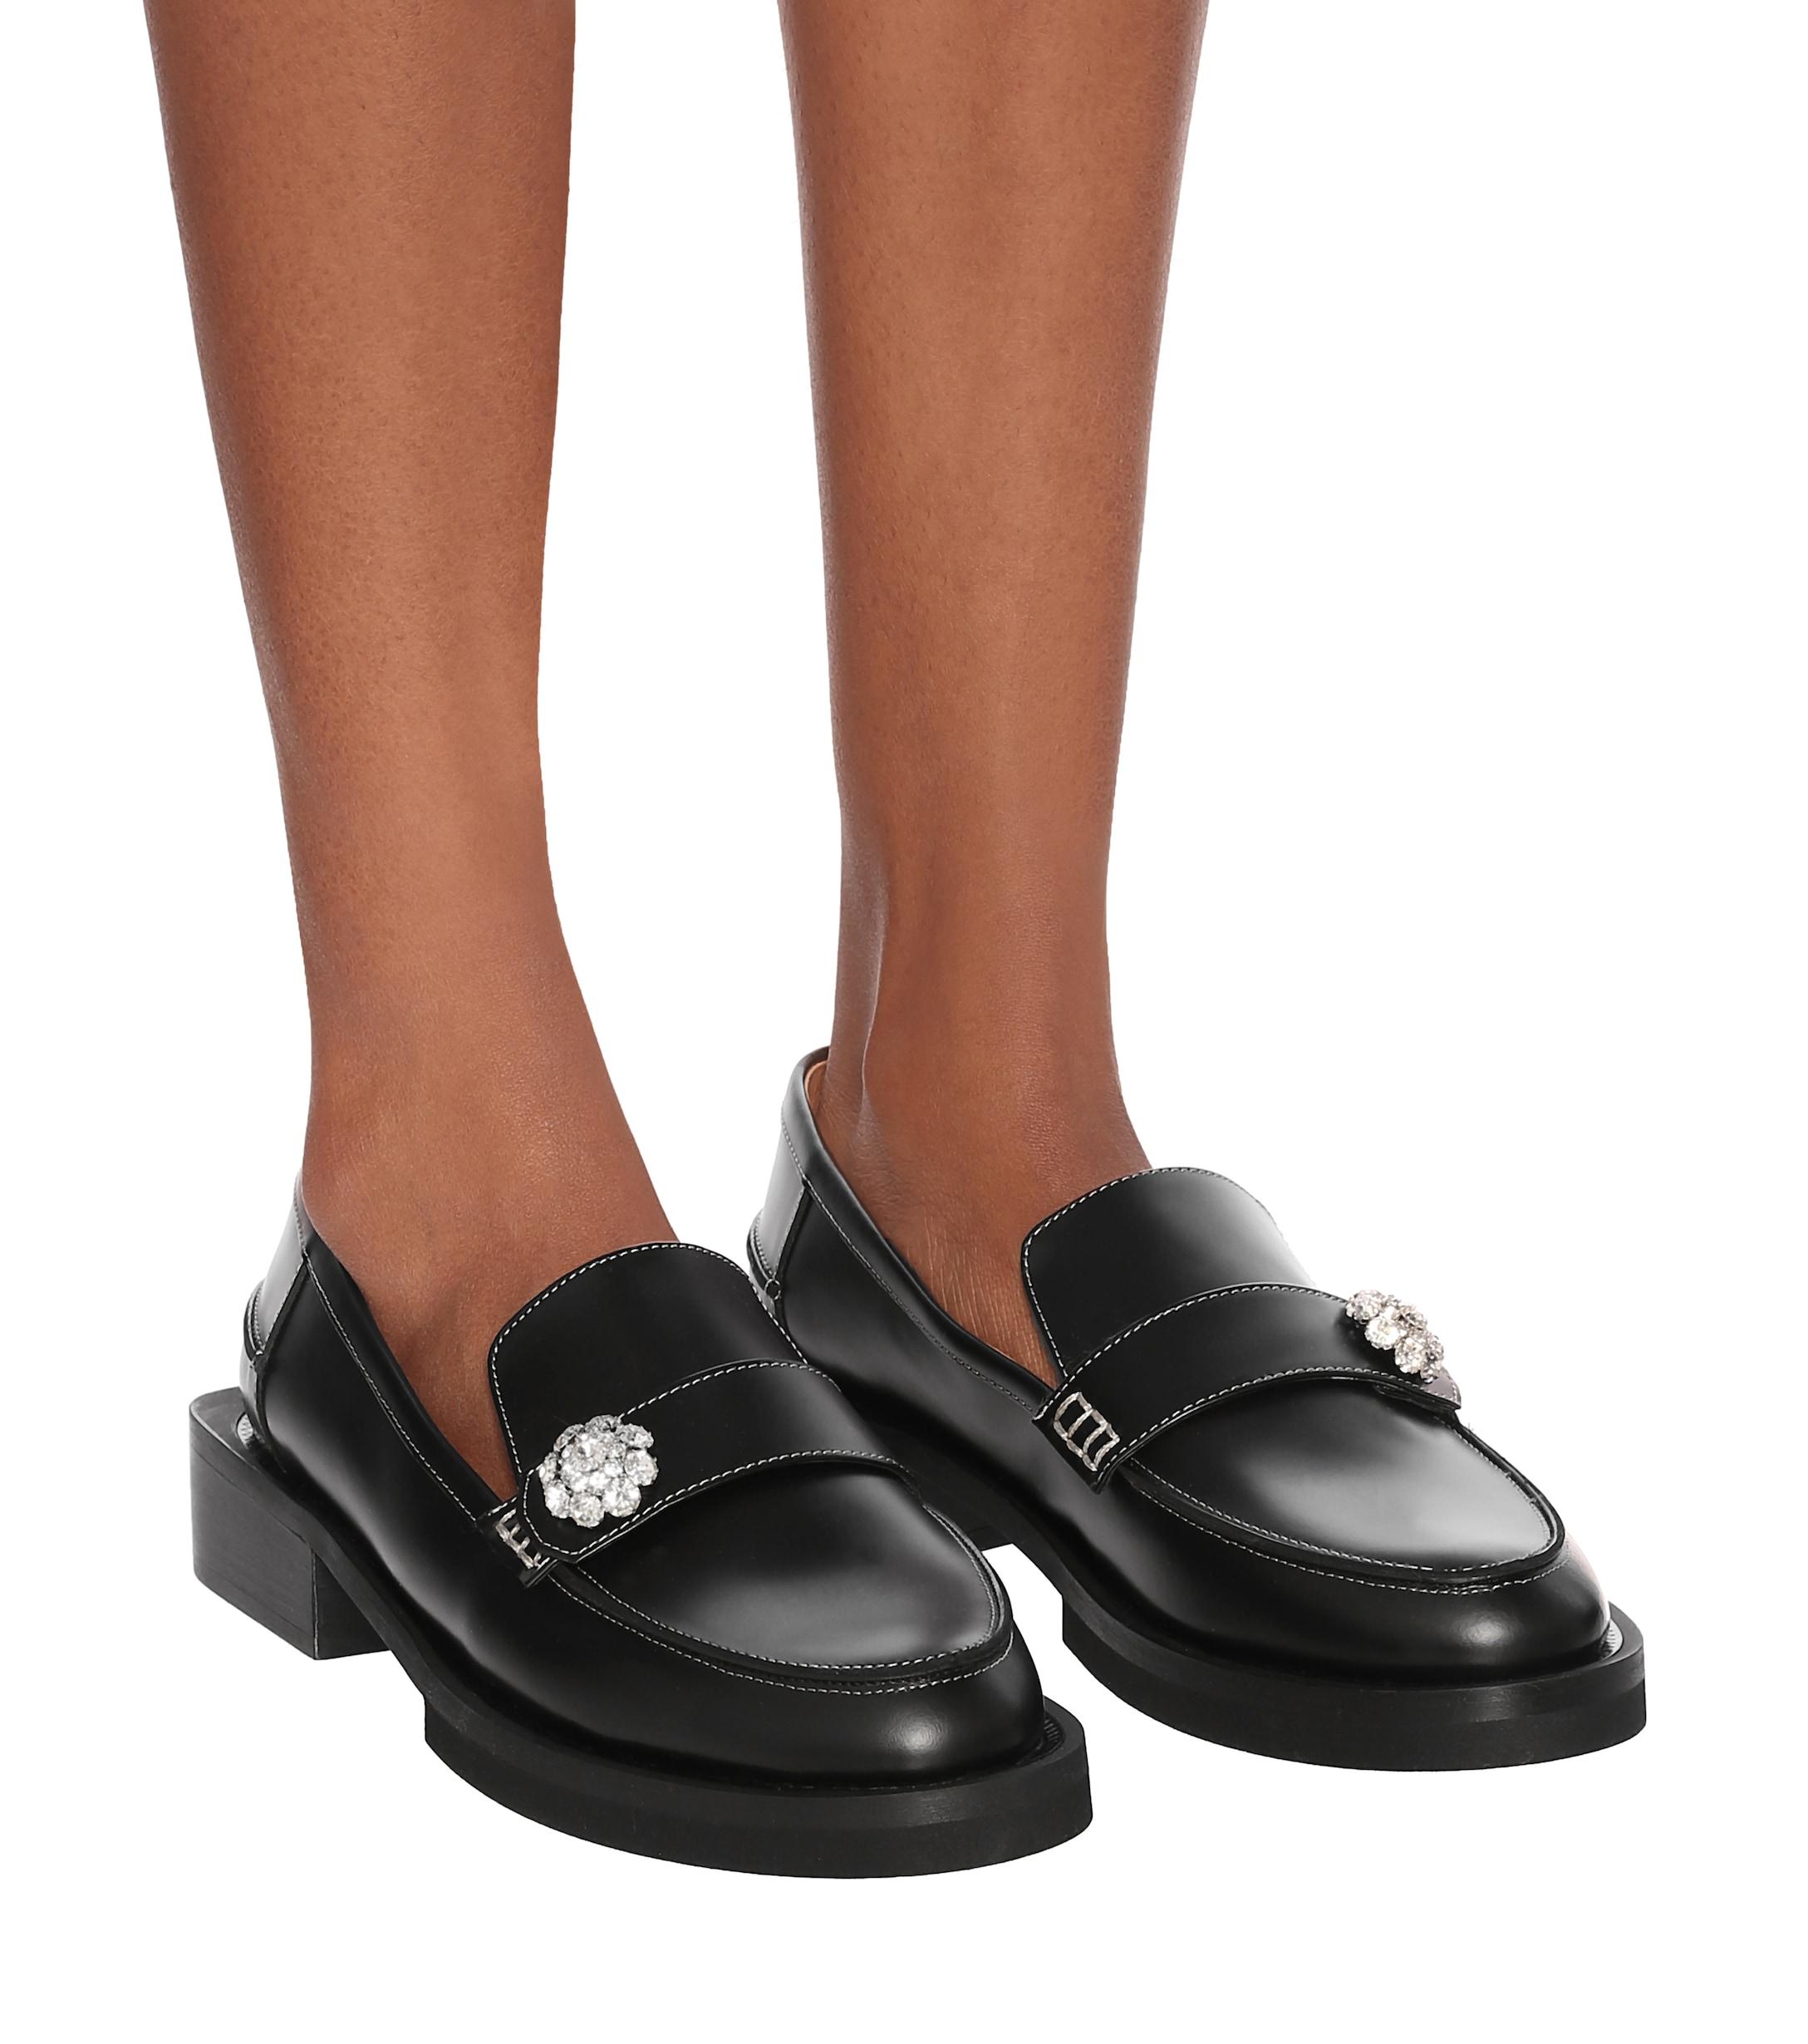 Ganni Jewel Leather Loafers in Black - Lyst